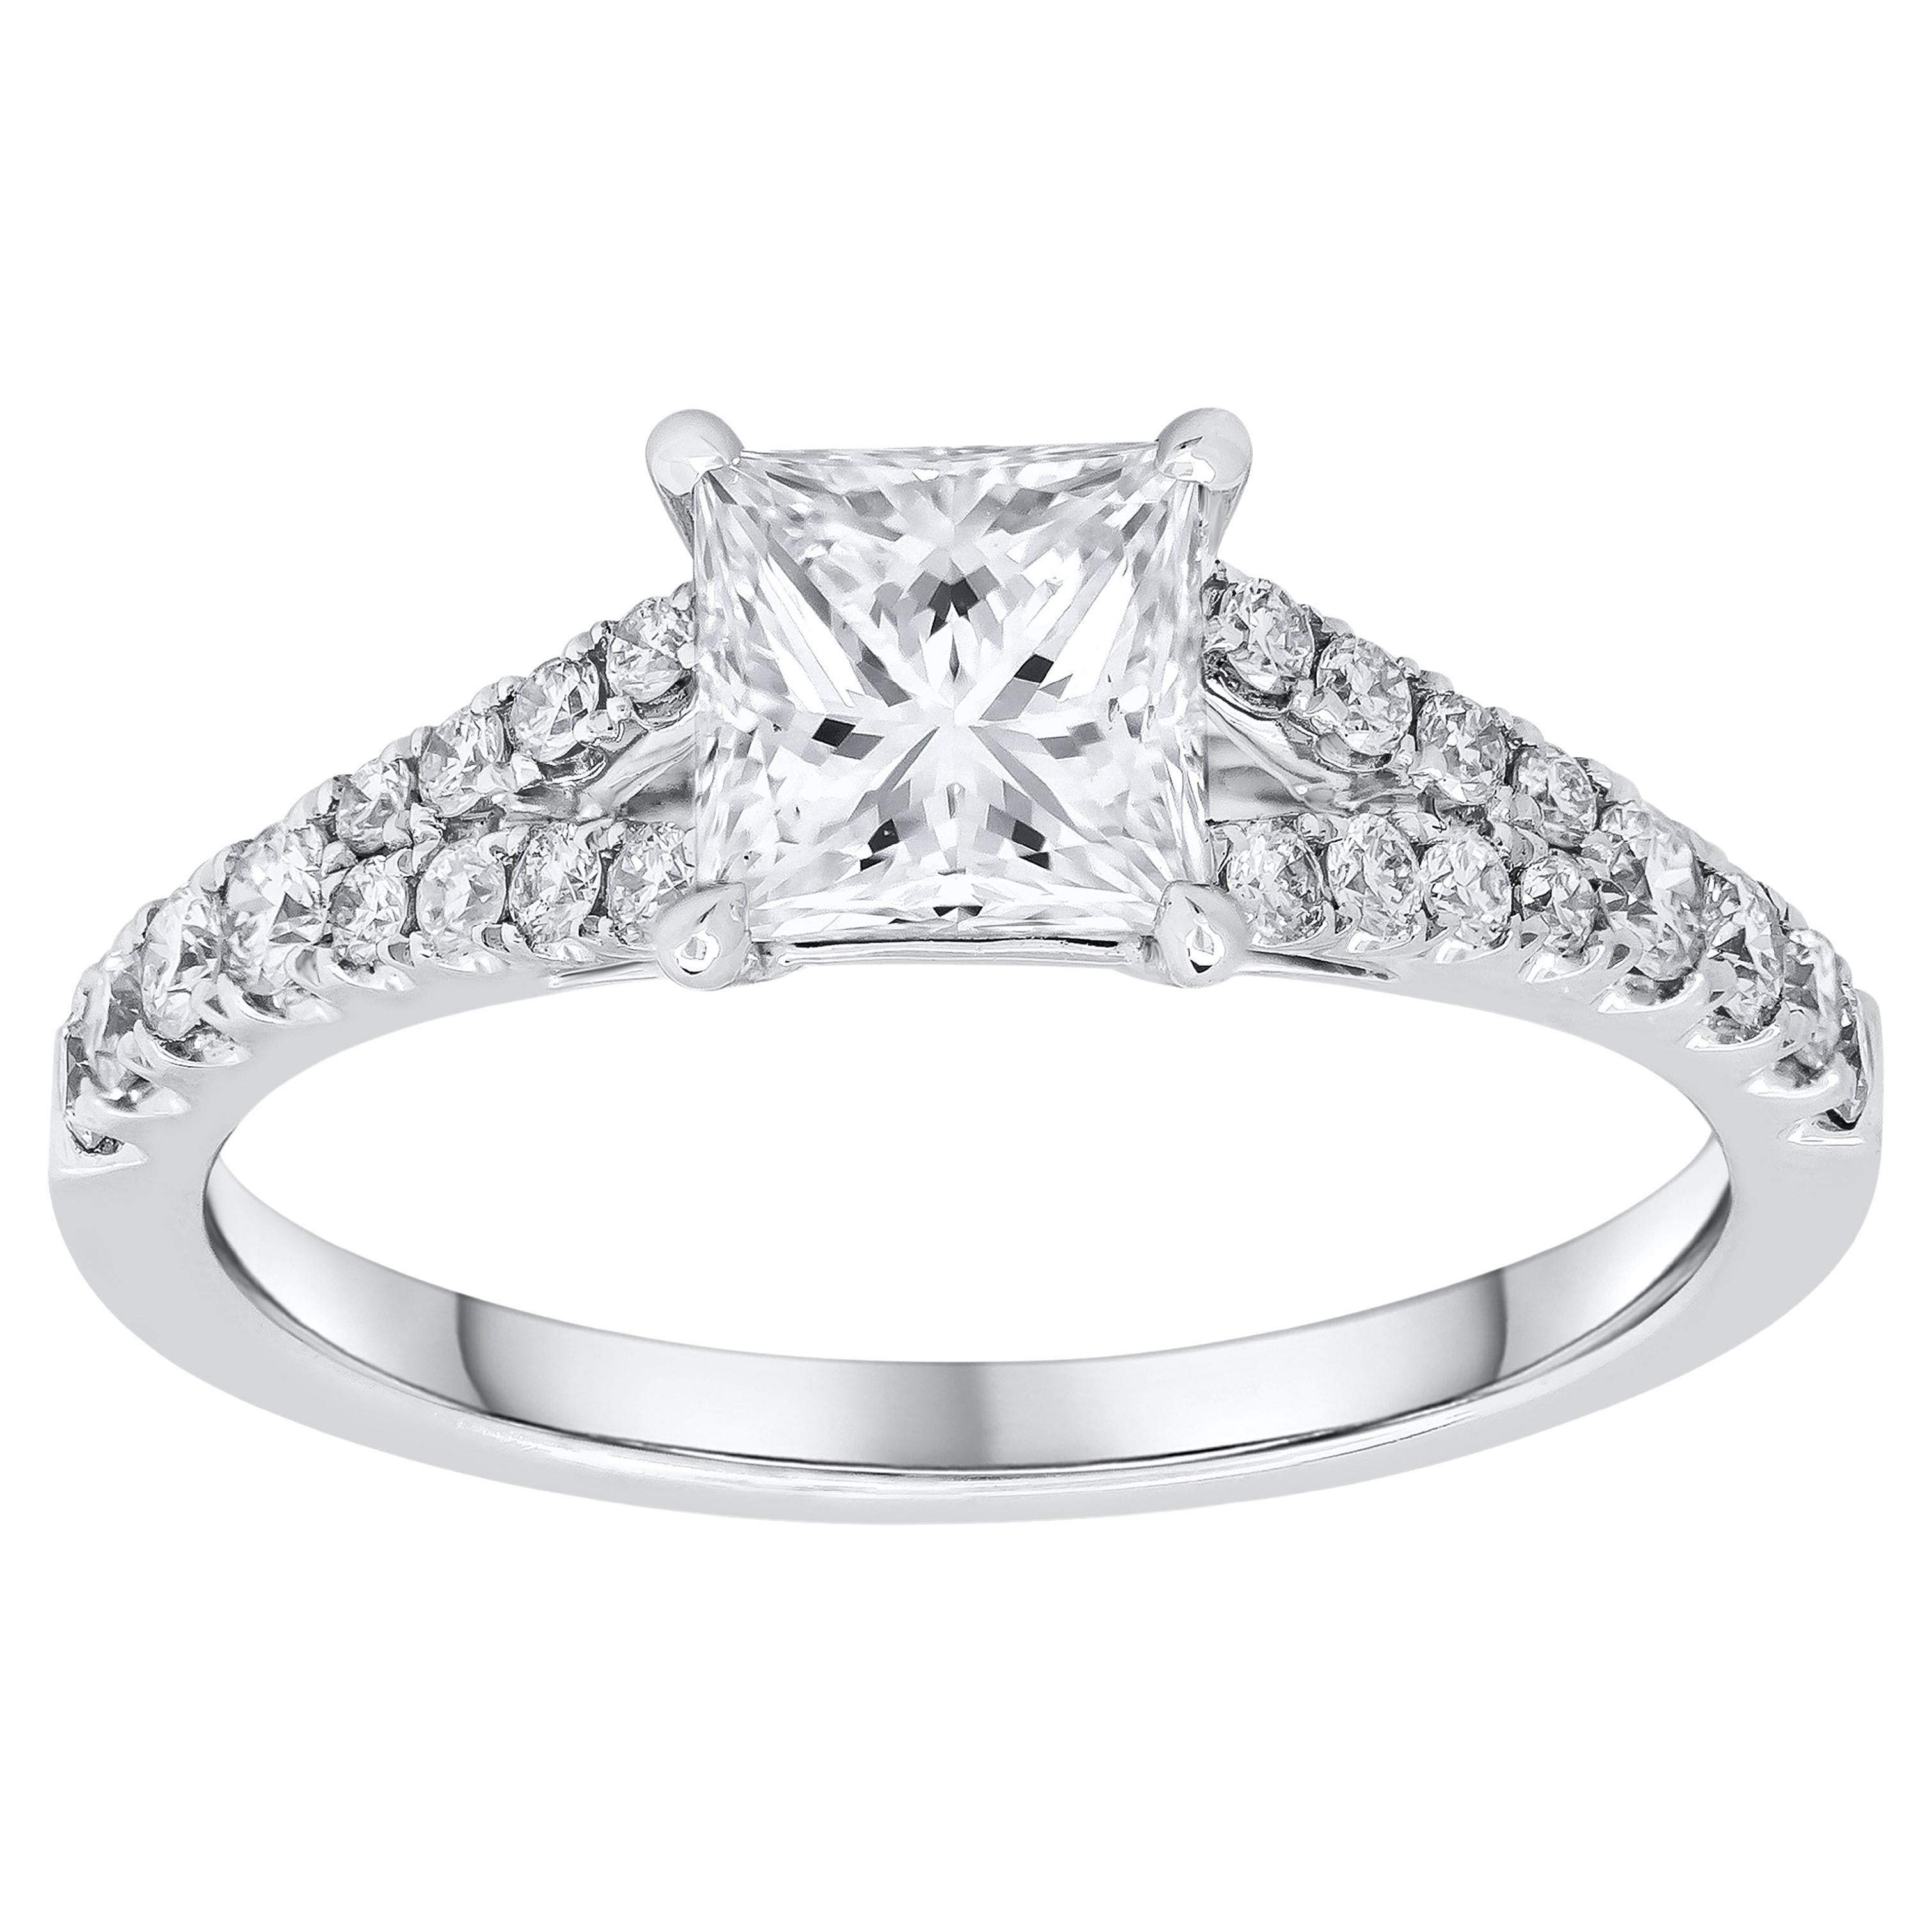 GIA Certified 1.06 Carats Princess Cut Diamond Engagement Ring with Side Stones For Sale